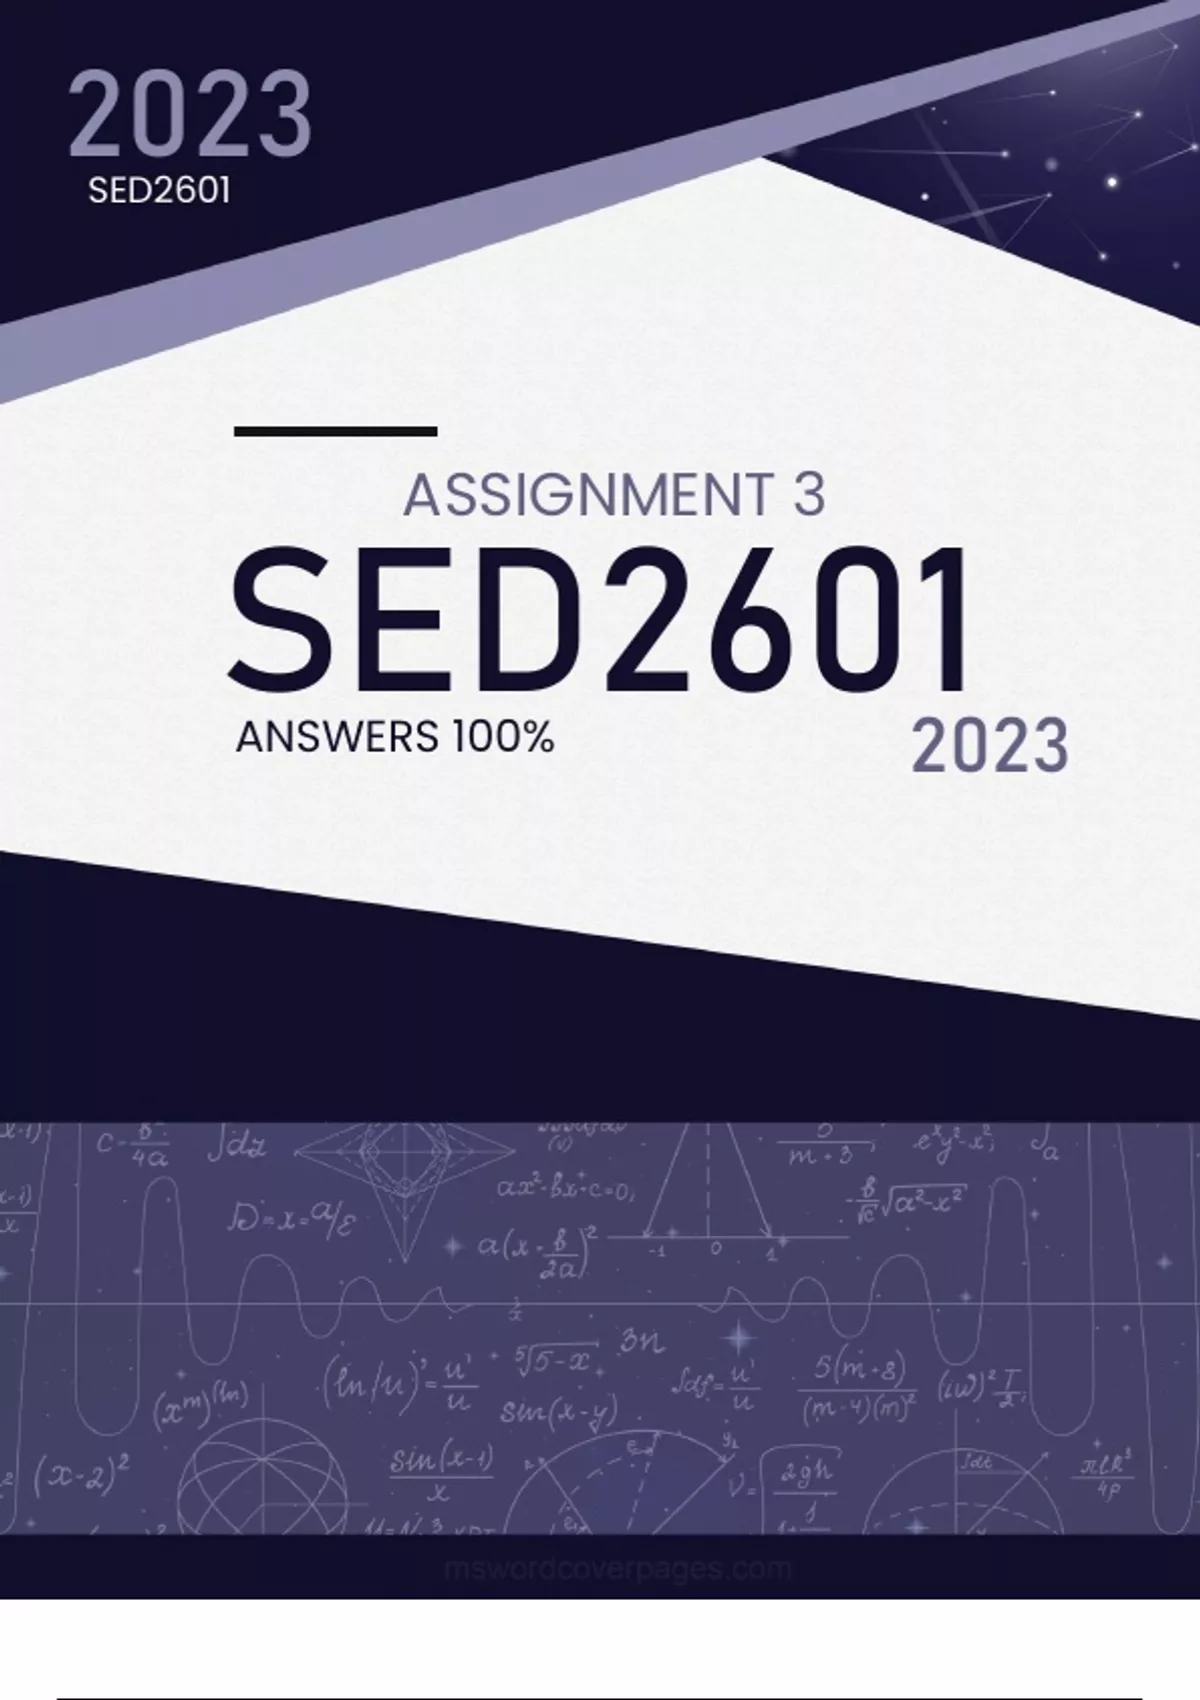 sed2601 assignment 3 answers 2023